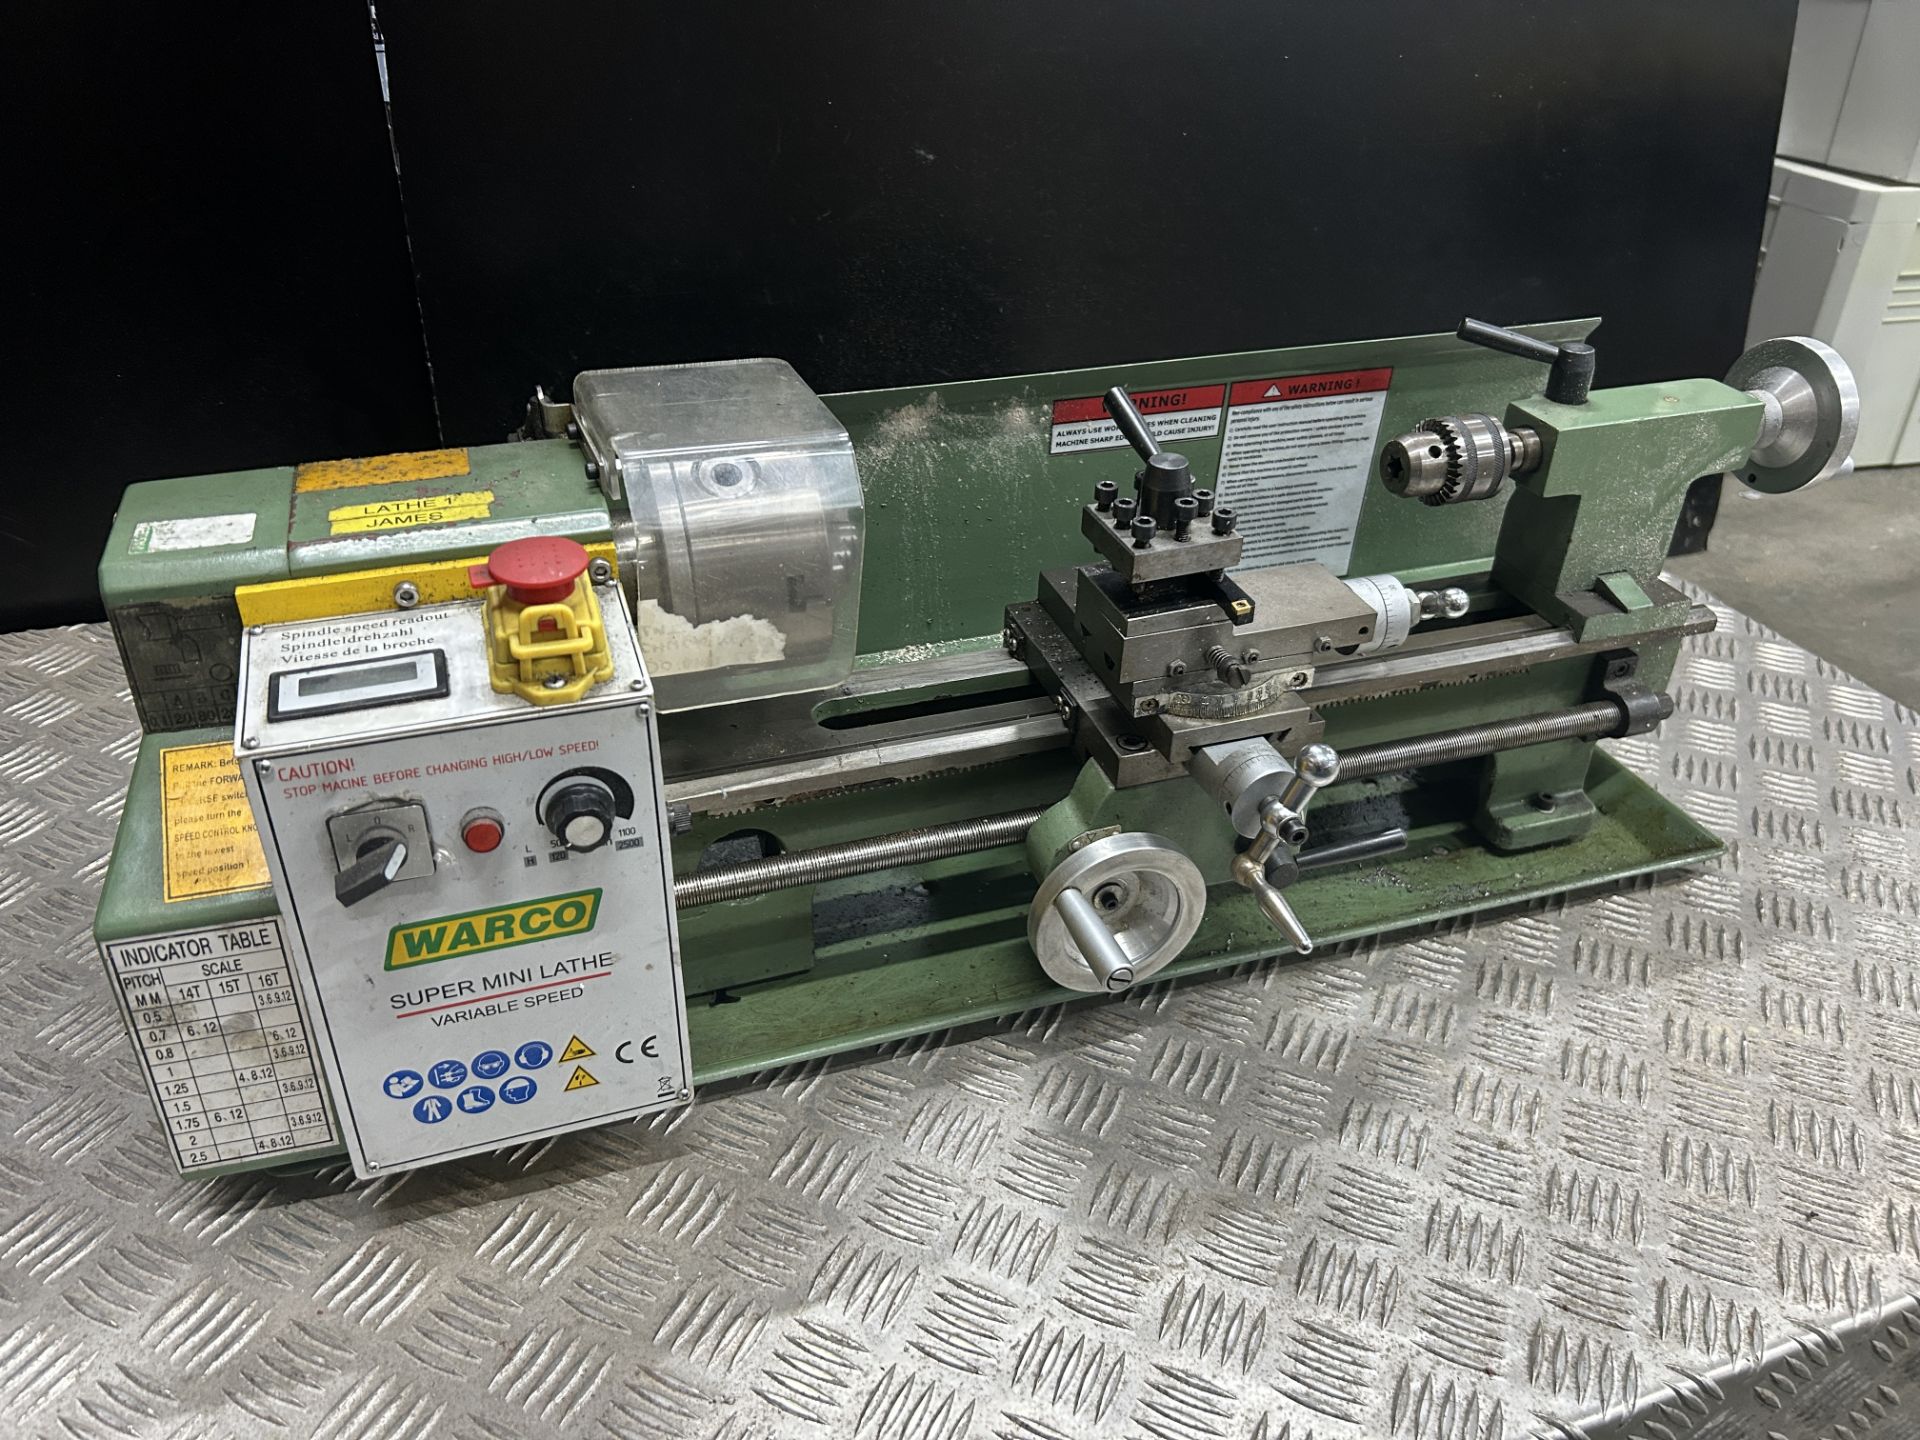 Warco Variable Speed Super Mini lathe - Image 2 of 3